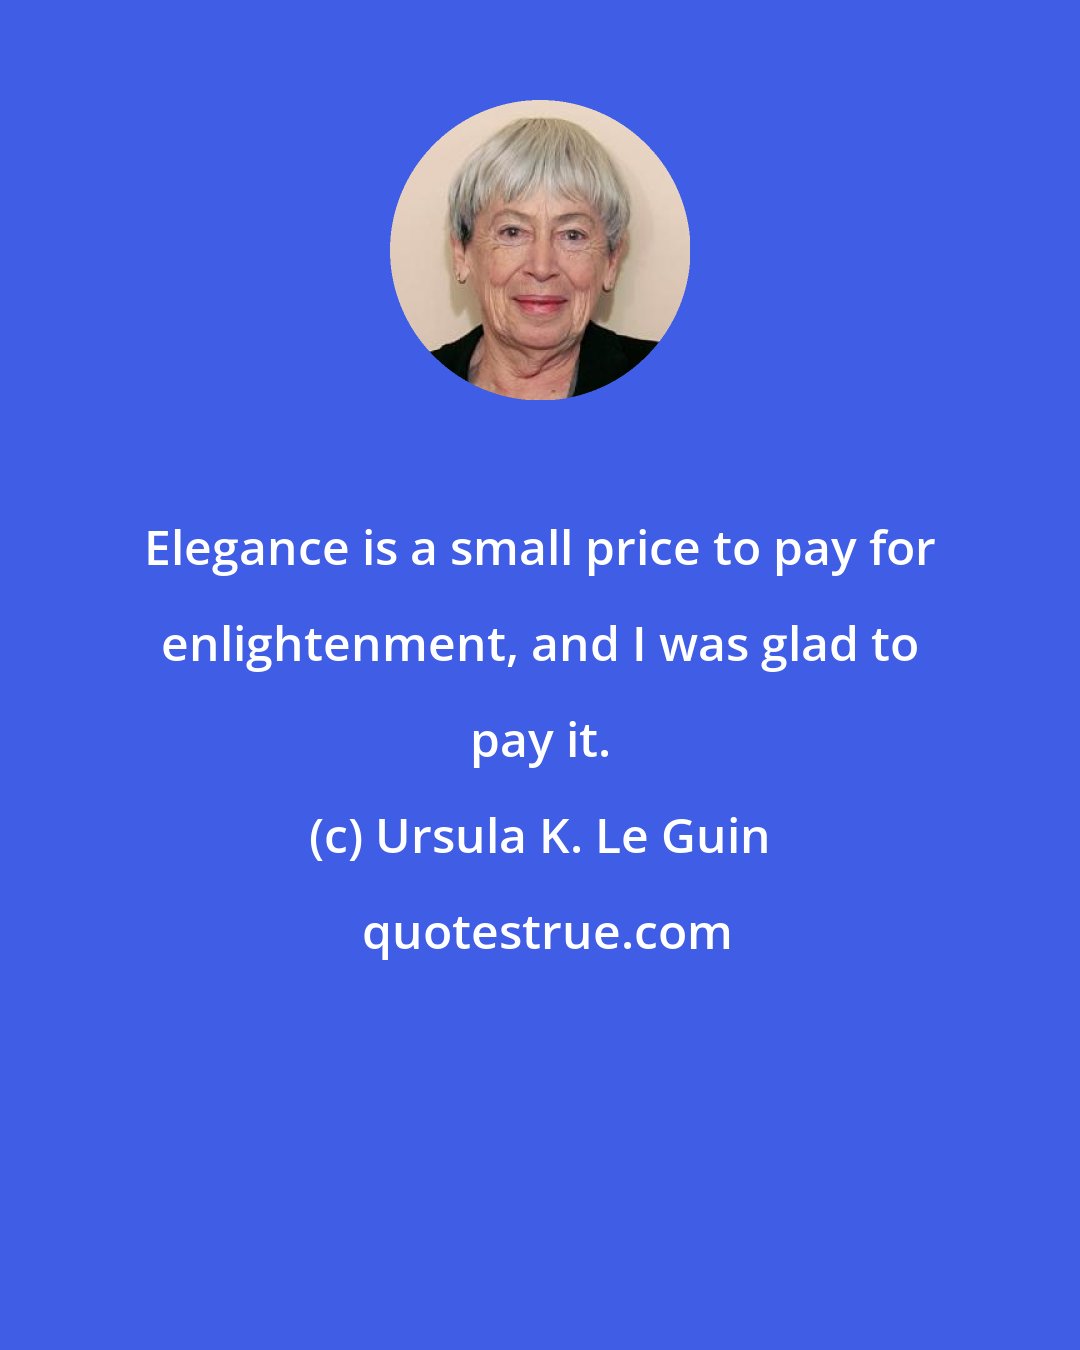 Ursula K. Le Guin: Elegance is a small price to pay for enlightenment, and I was glad to pay it.